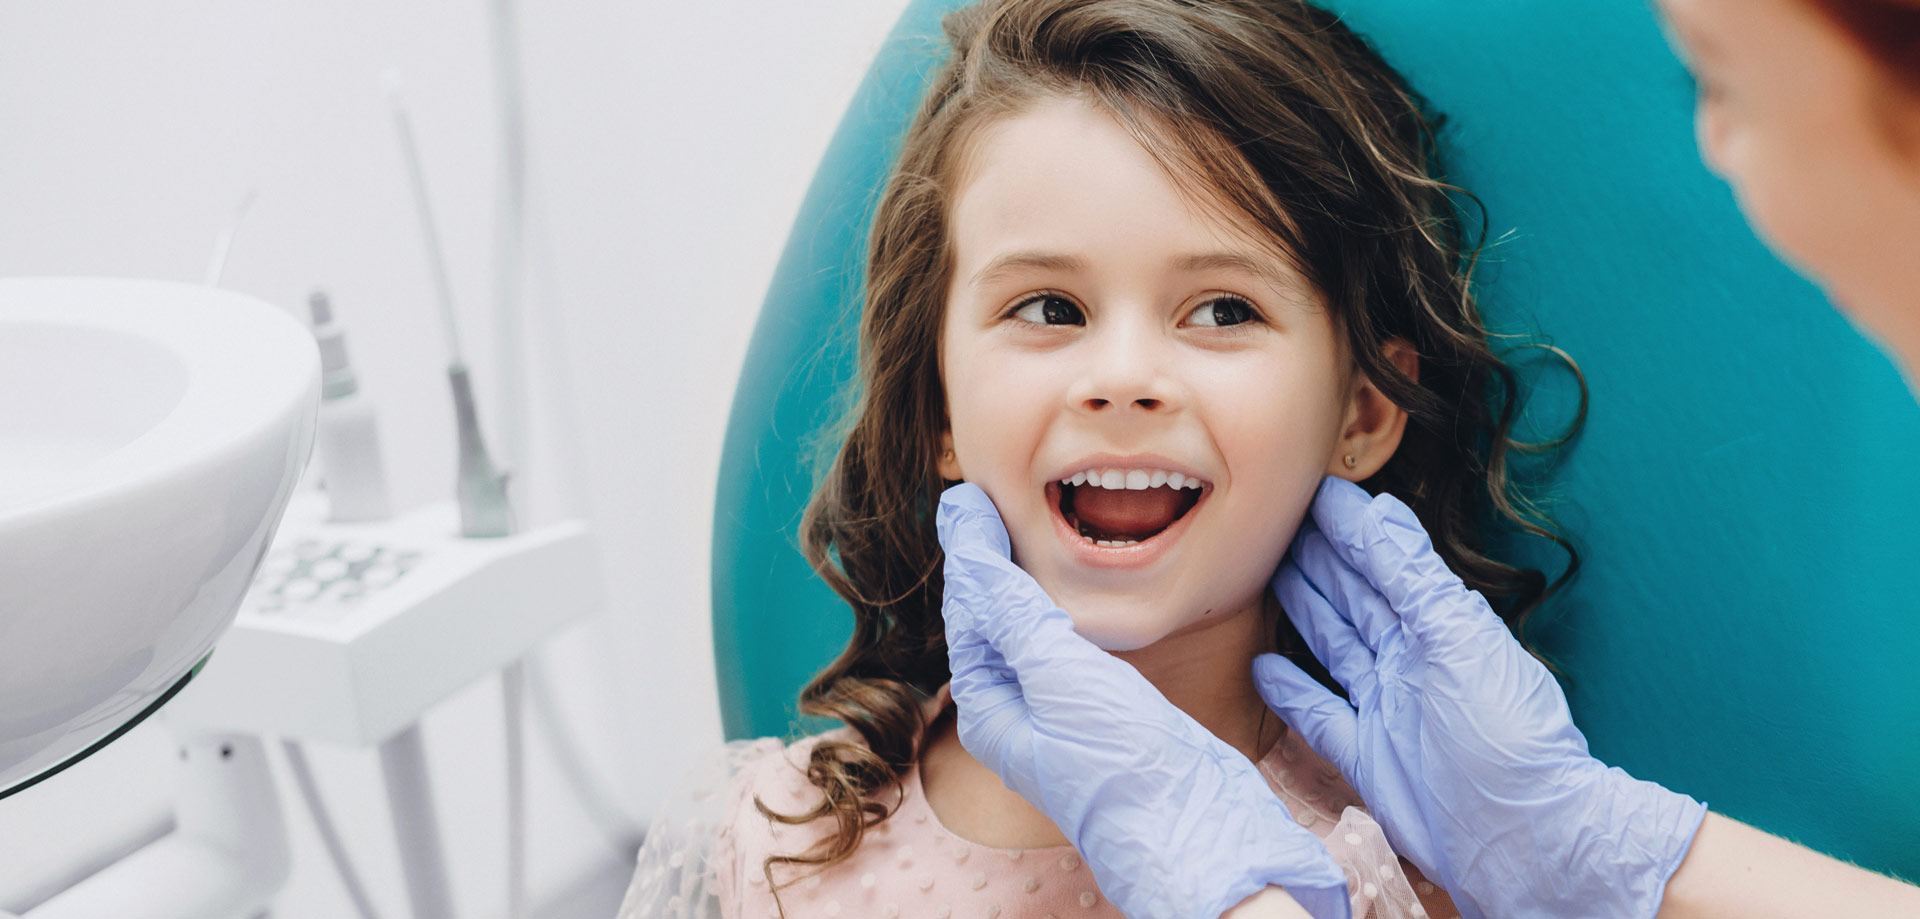 Early Interceptive Orthodontics: What are the benefits to a child’s health?